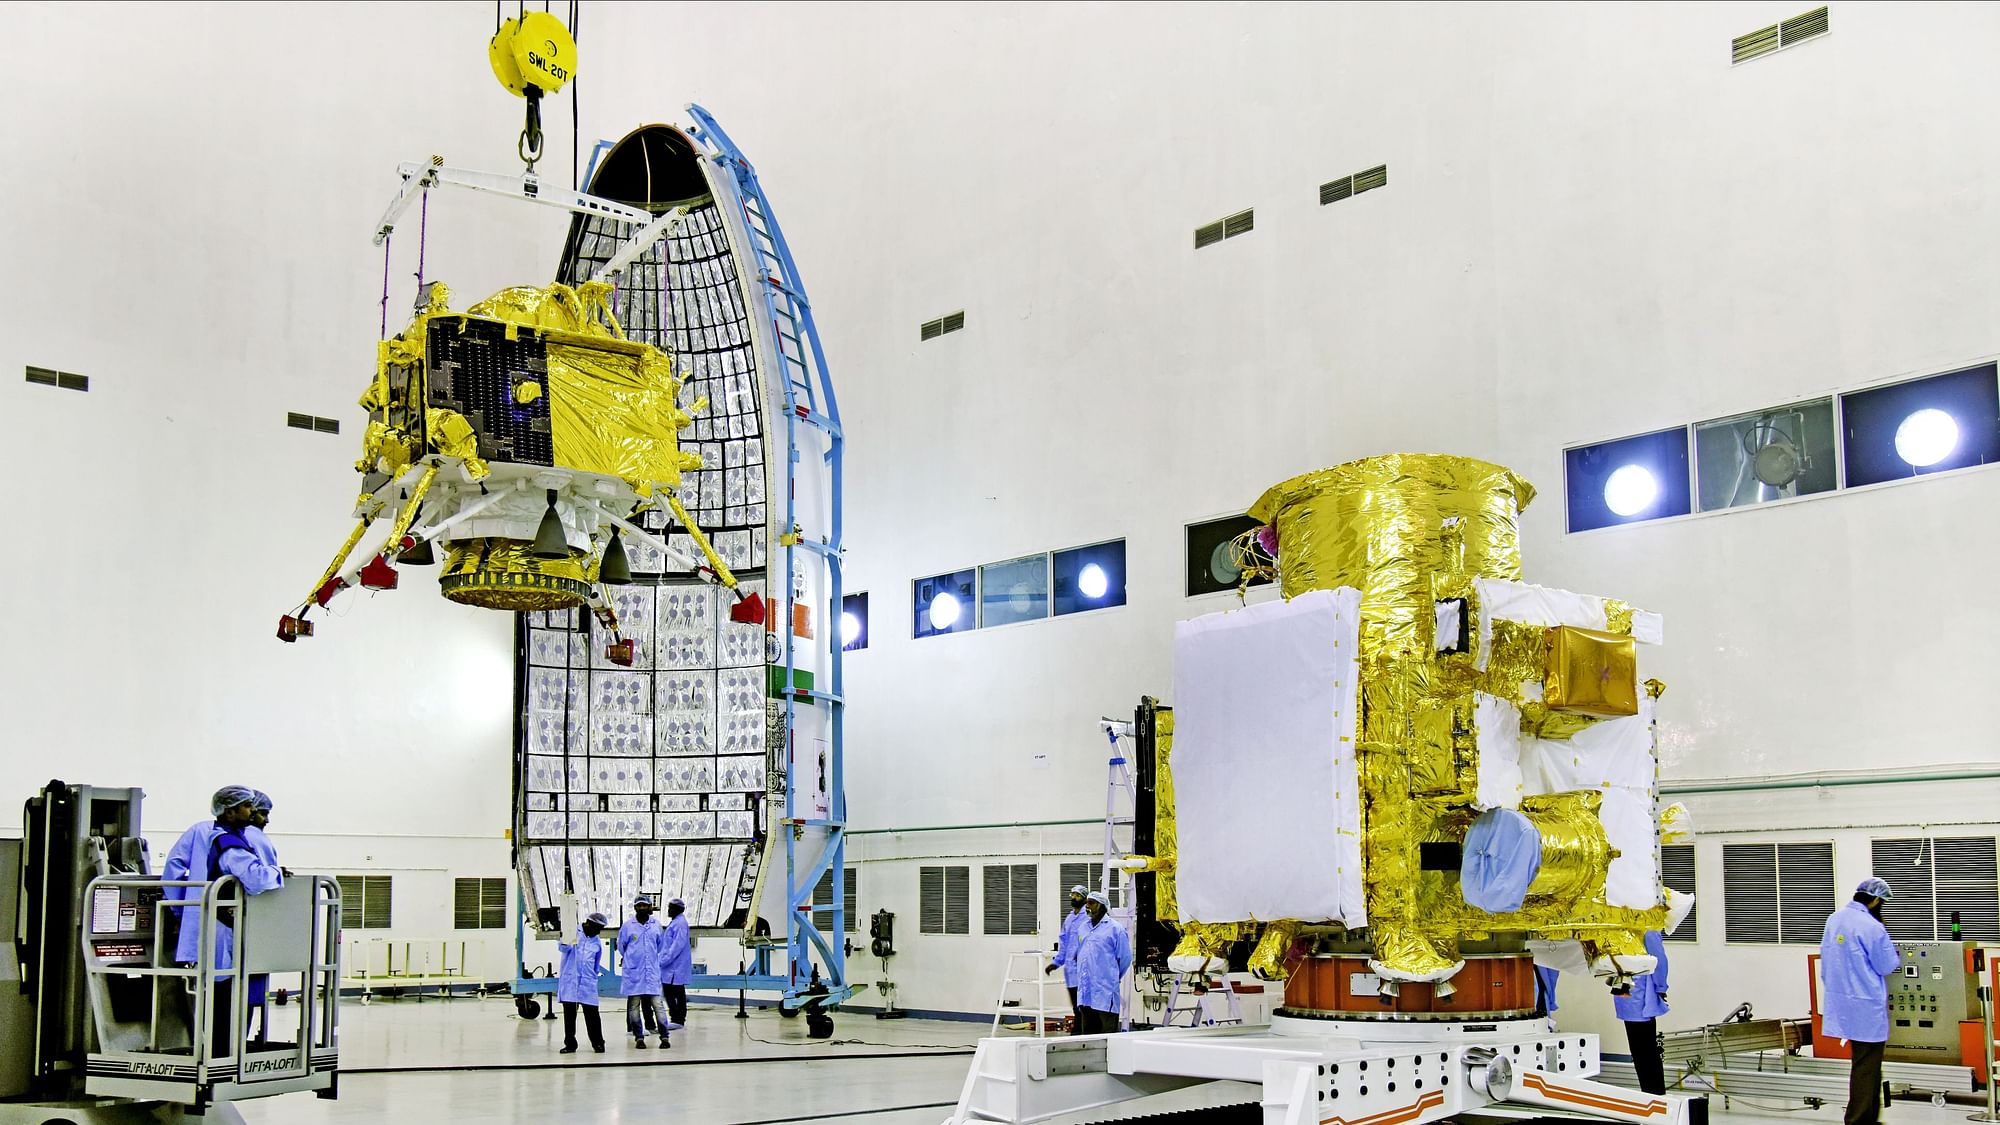 Hoisting of the Vikram lander during Chandrayaan-2 spacecraft integration at the launch centre.